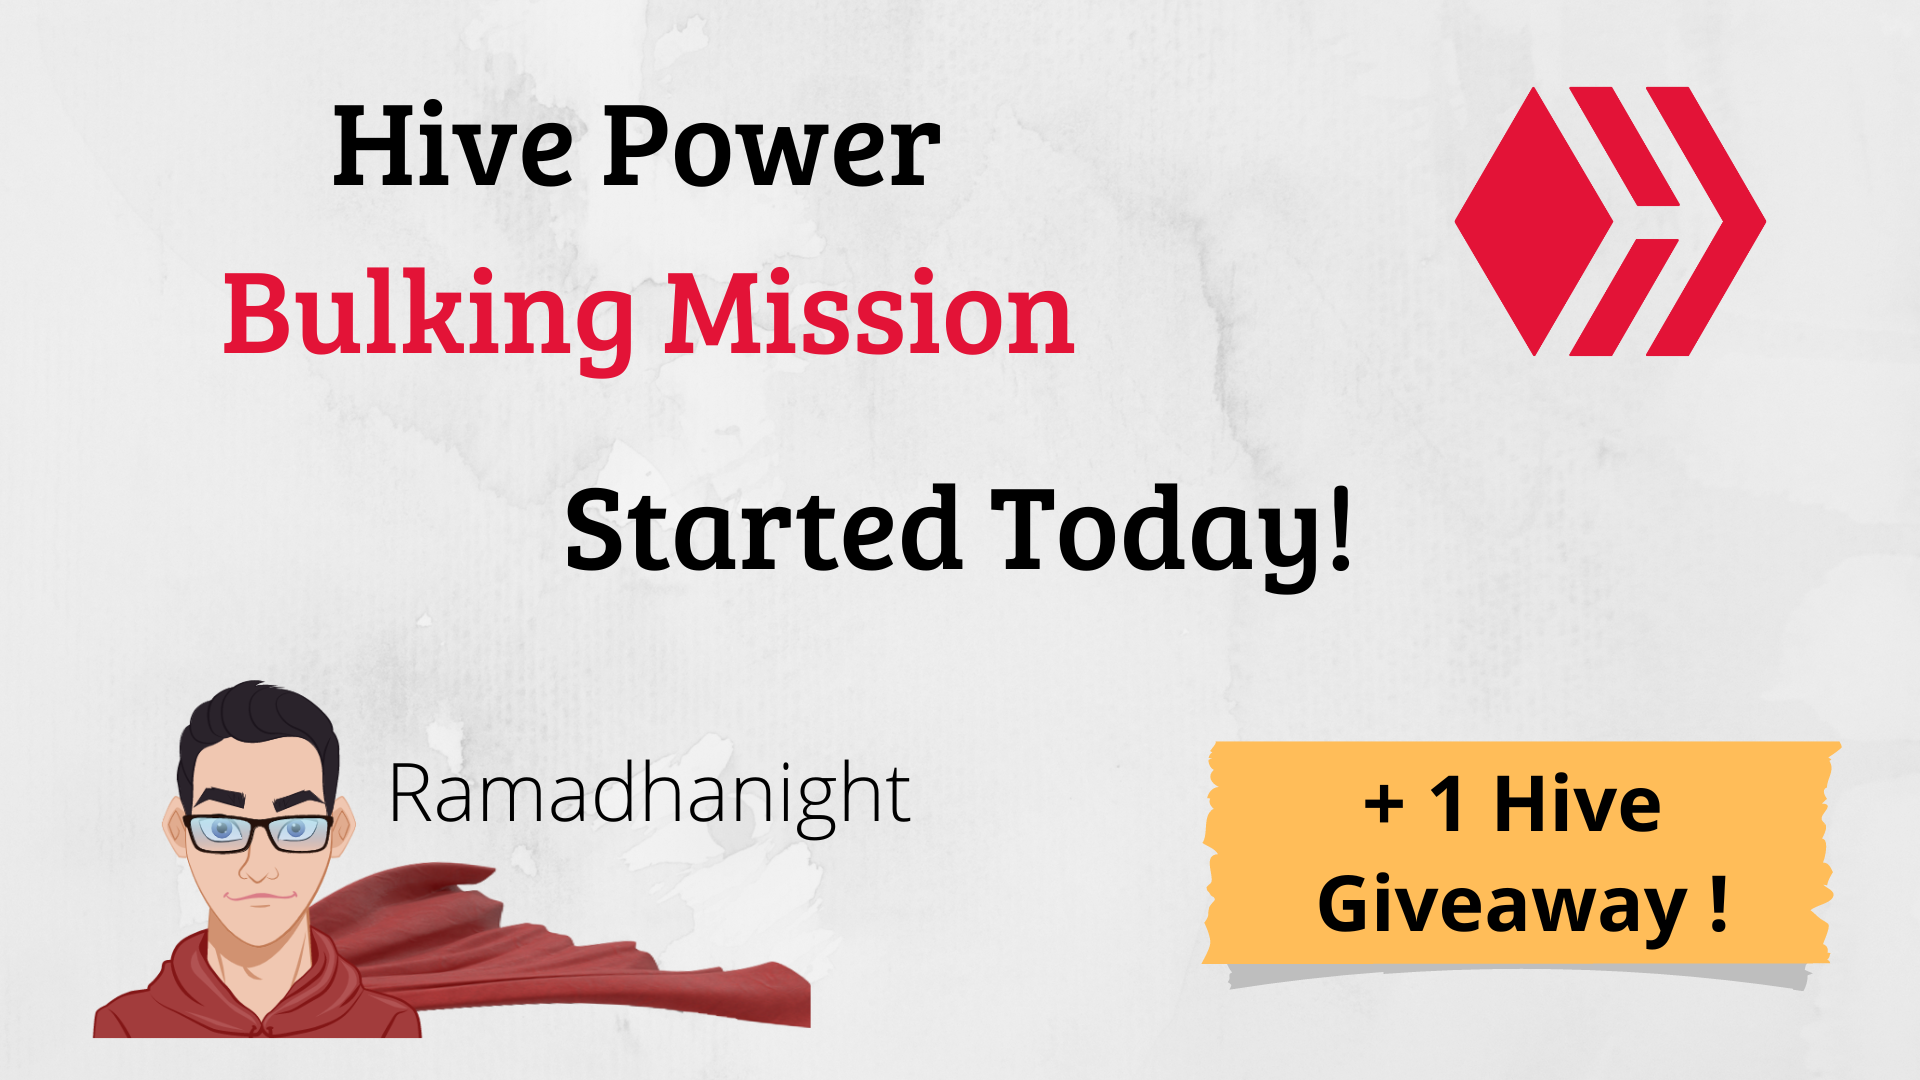 @ramadhanight/start-of-my-hive-power-bulking-mission-and-a-giveaway-with-hive-as-reward-